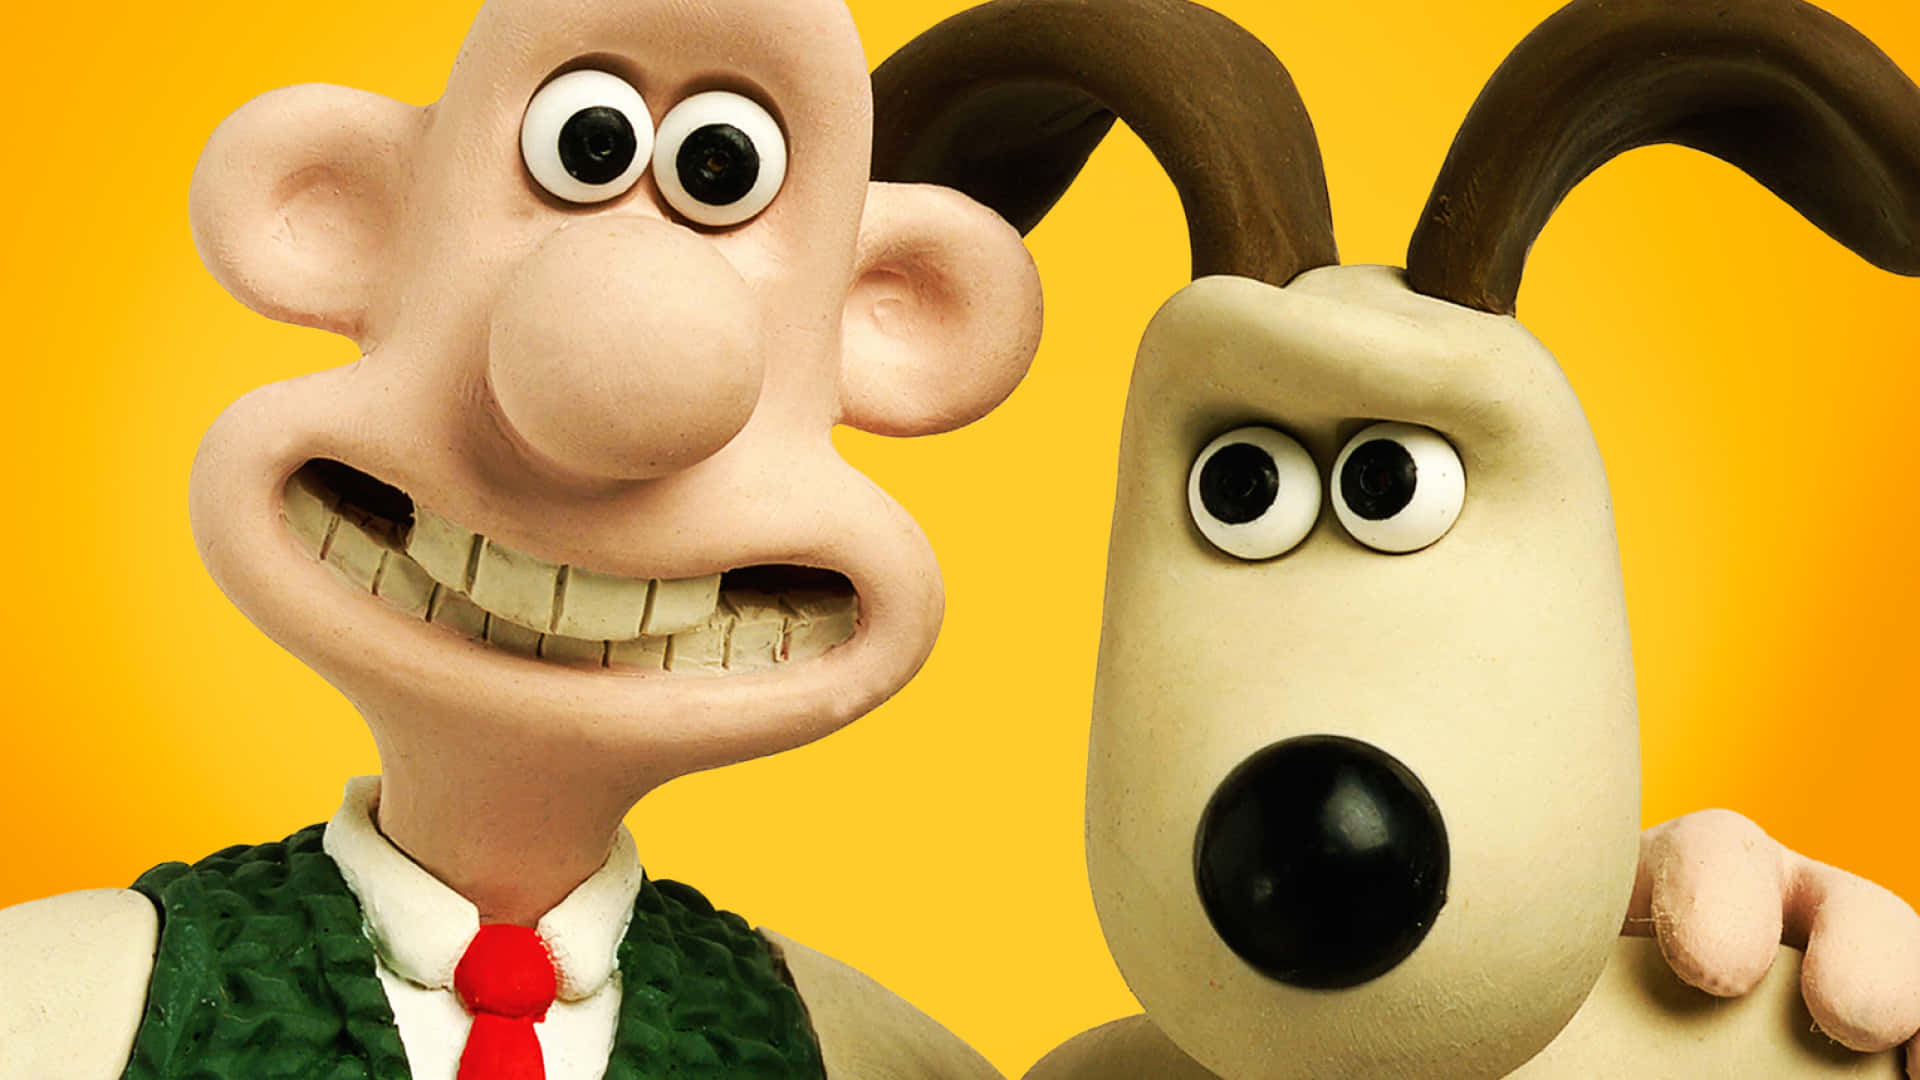 Grinning Wallace&Gromit The Curse Of The Were-rabbit Wallpaper